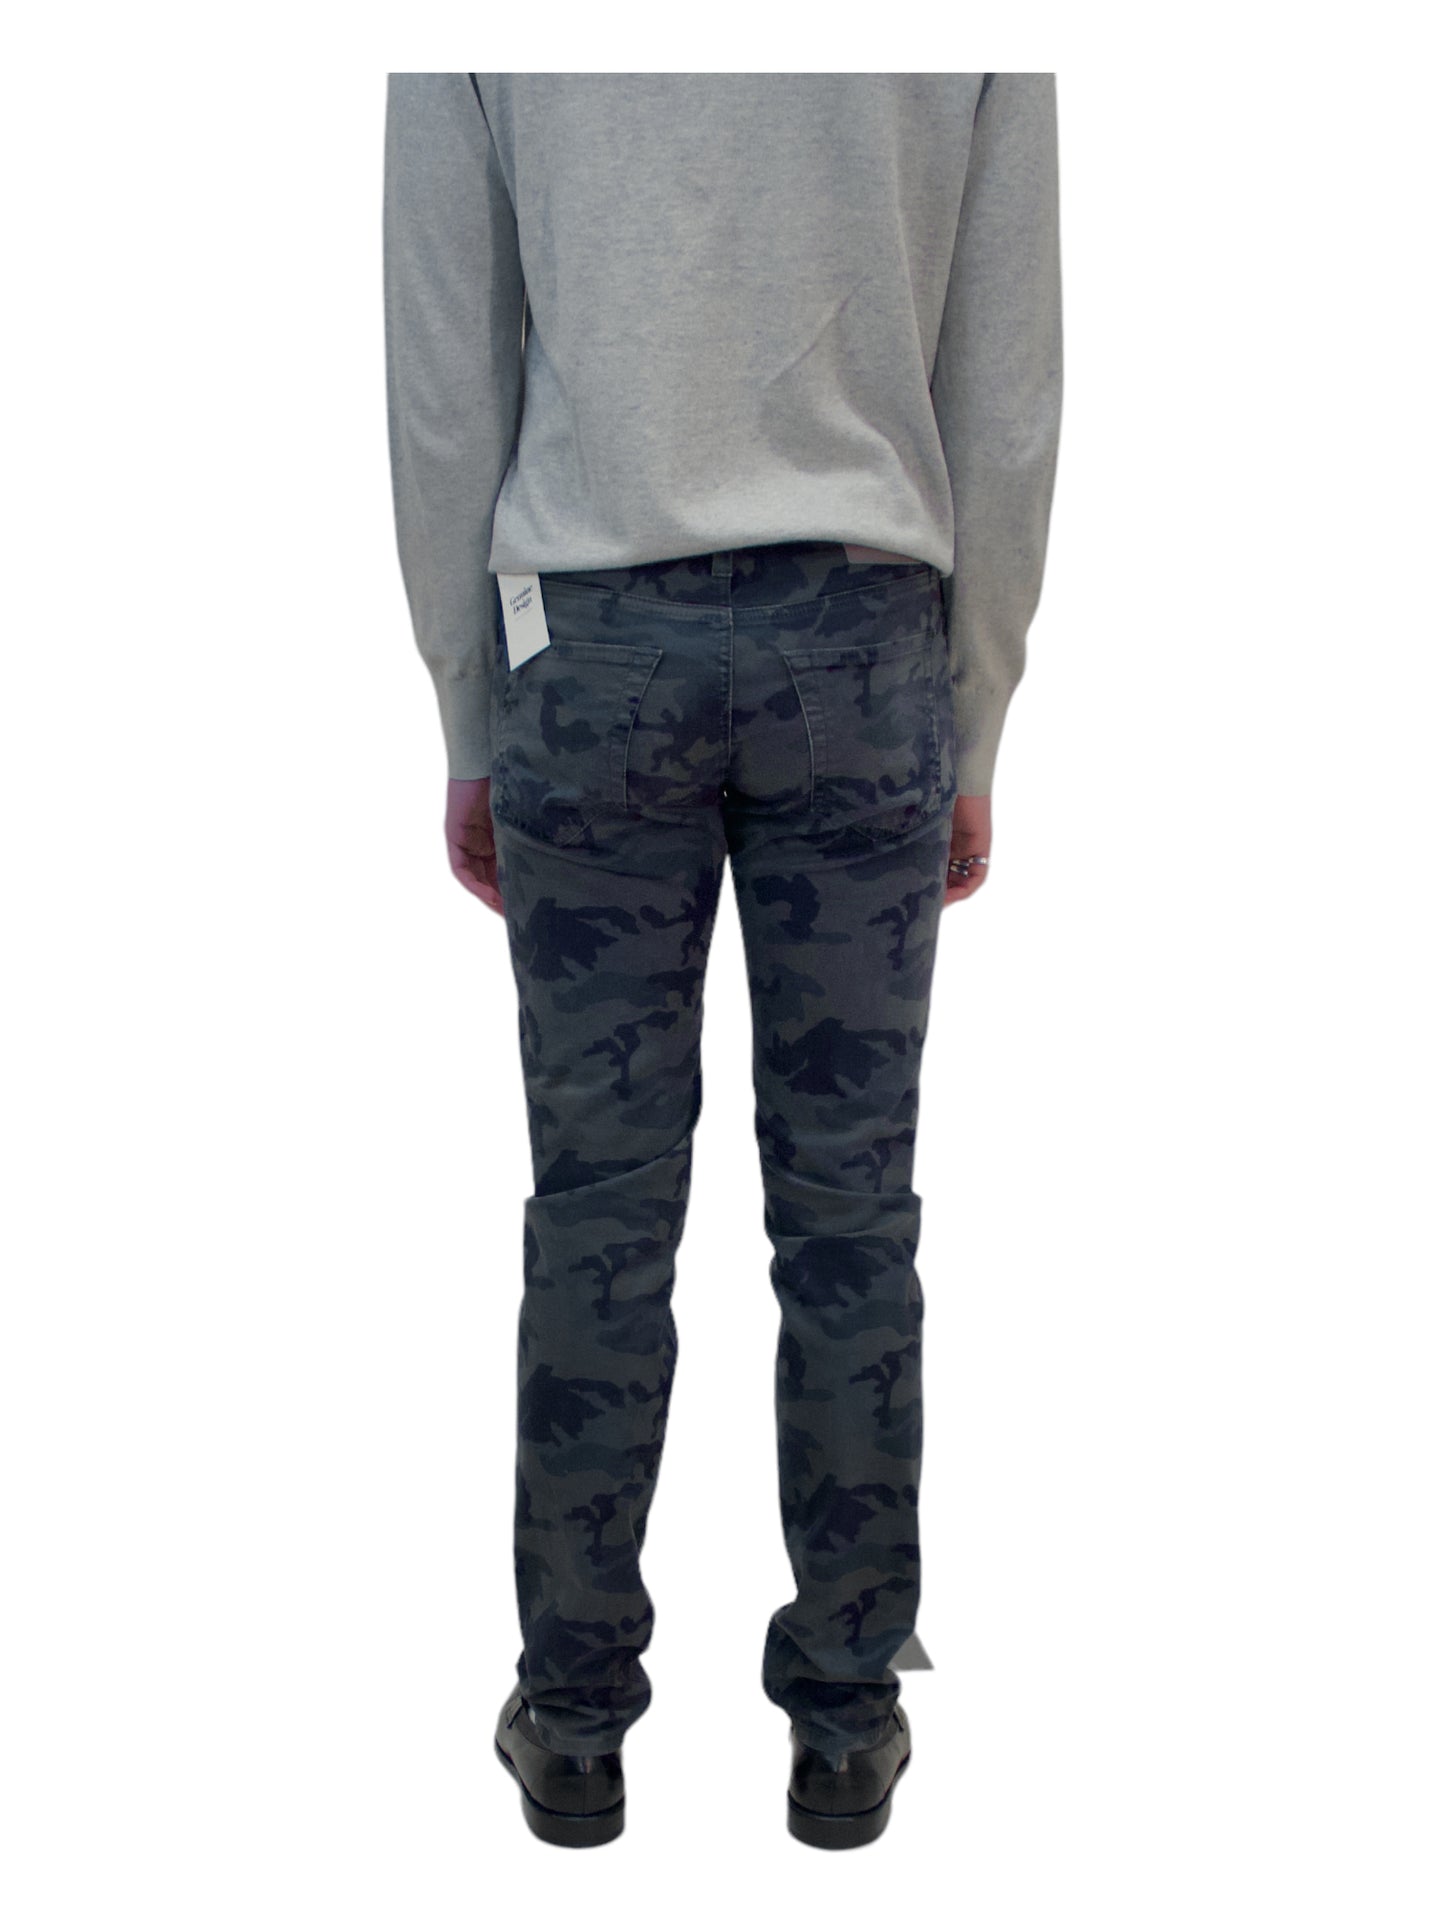 A.G. The Tellis Camo Modern Slim Jeans - Genuine Design Luxury Consignment for Men. New & Pre-Owned Clothing, Shoes, & Accessories. Calgary, Canada